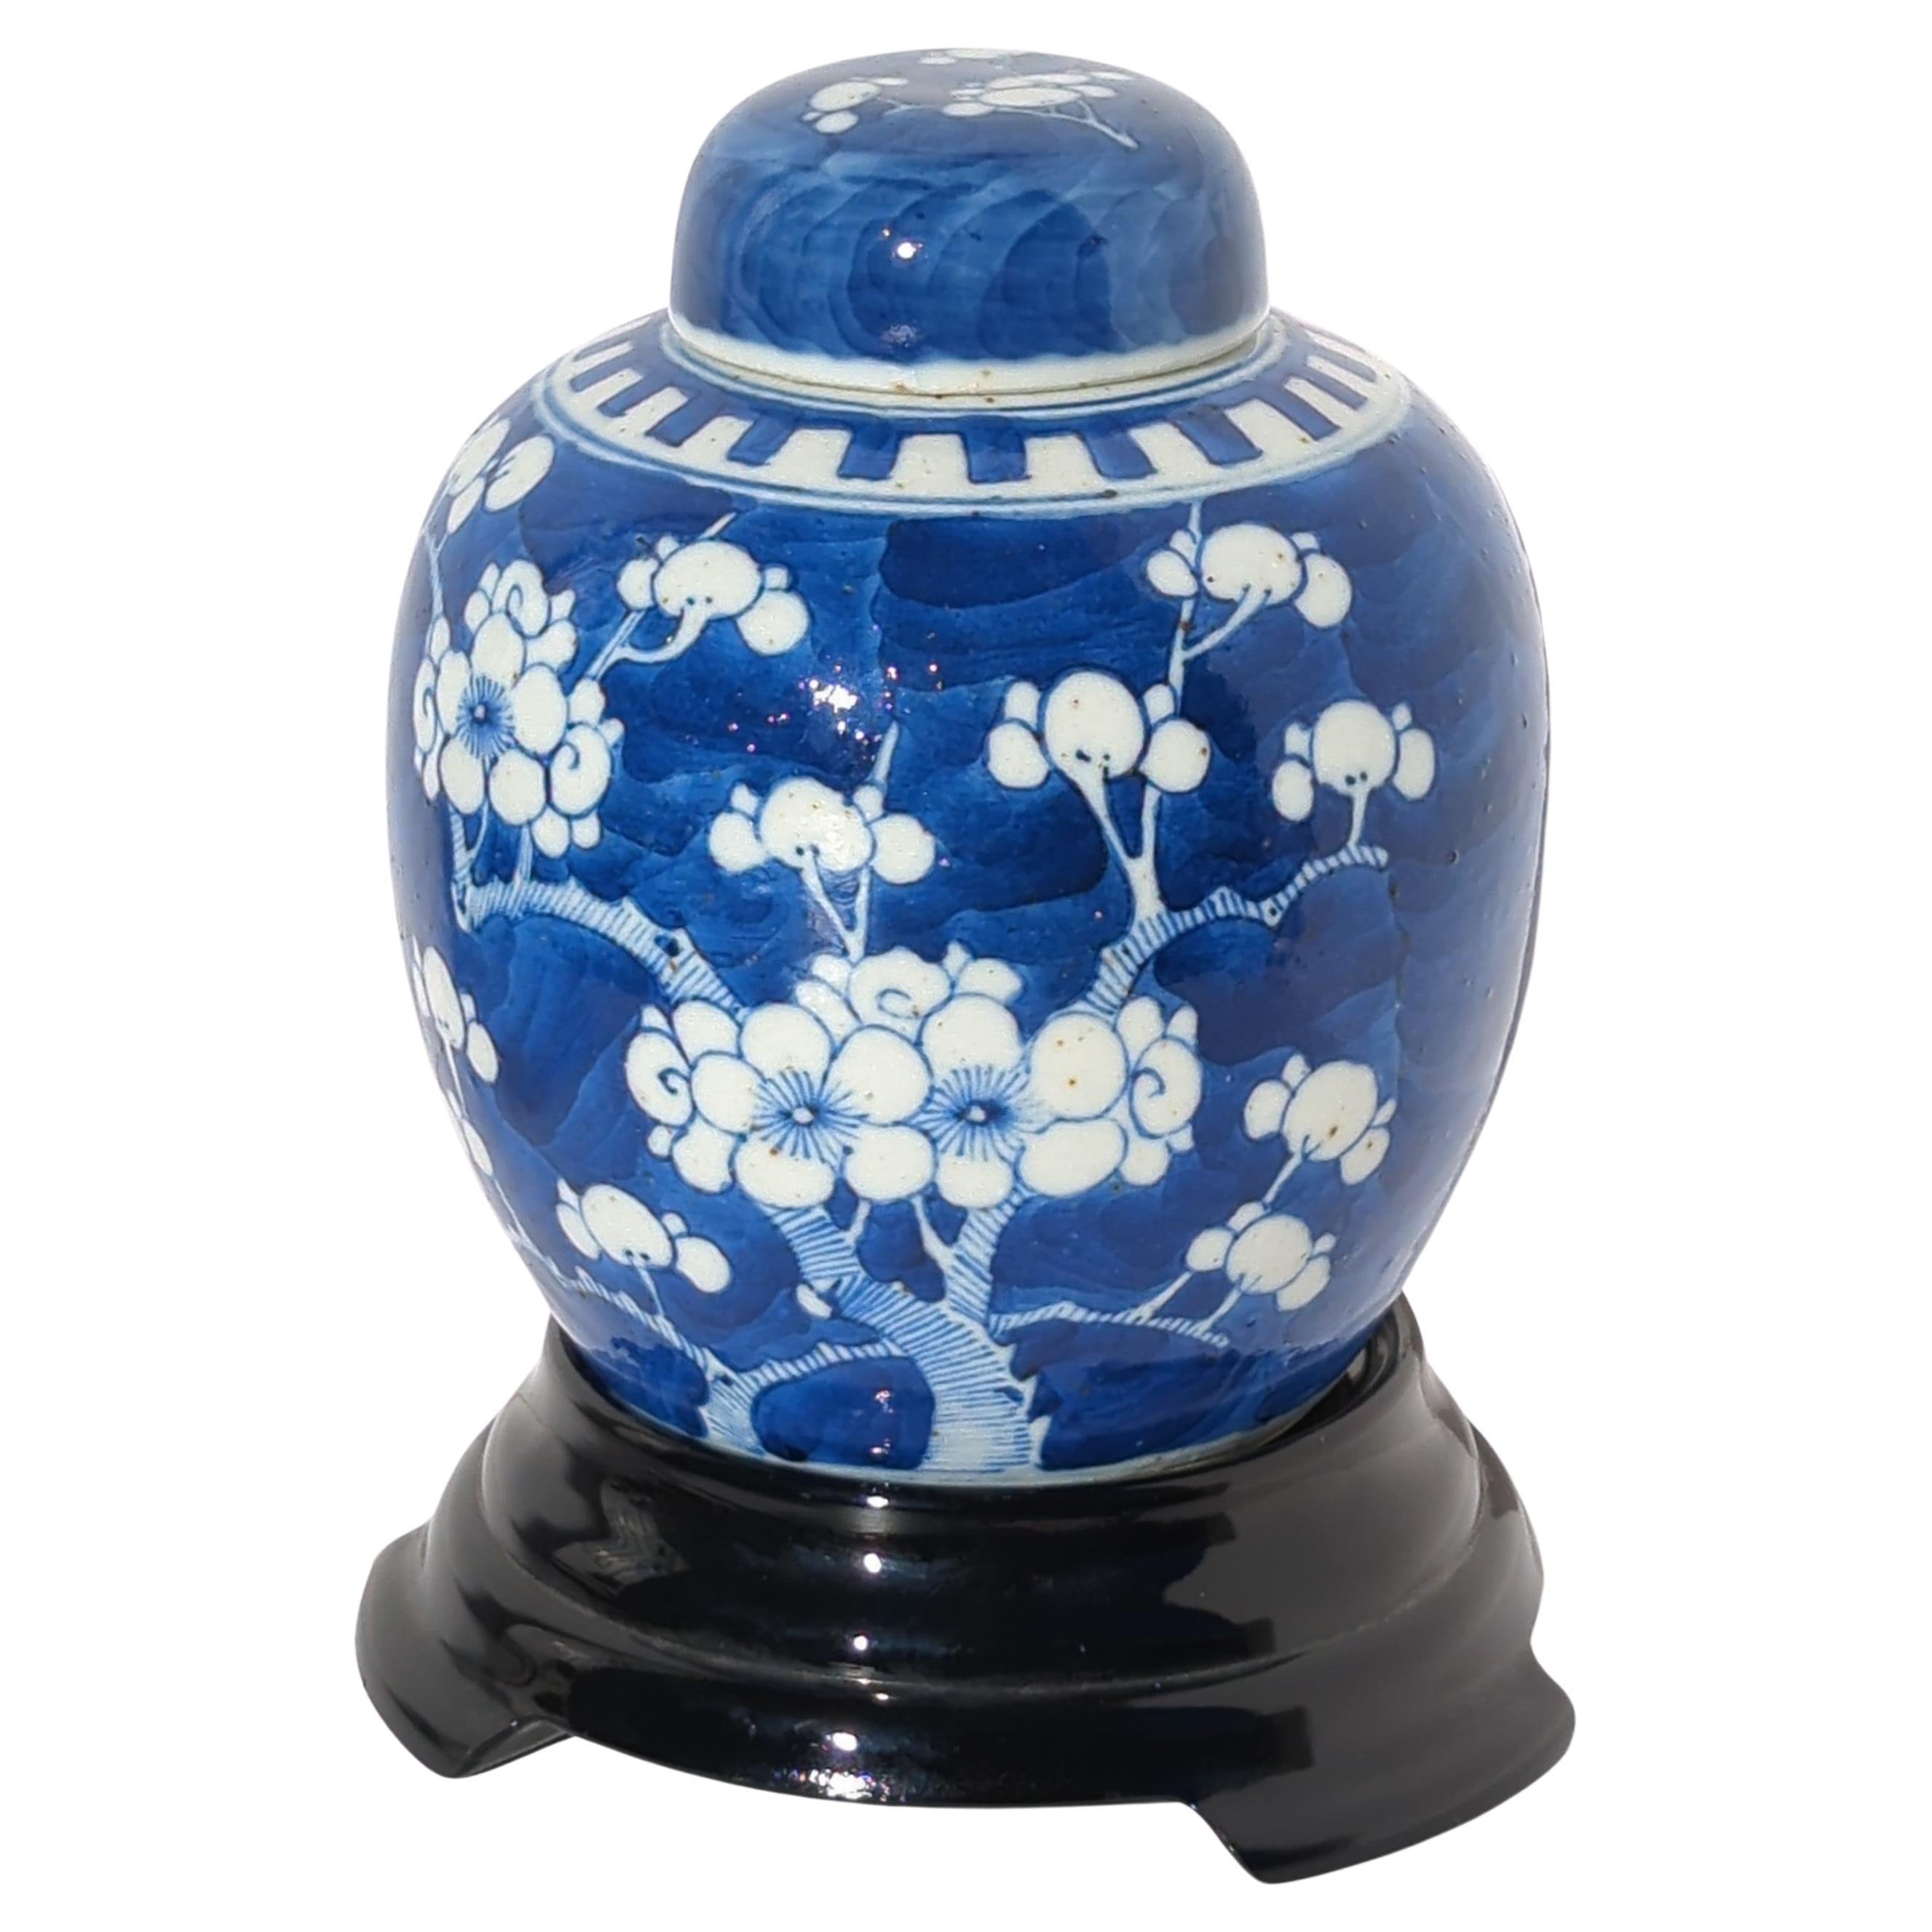 Chinese Export Antique Chinese Blue & White Prunus Blossoms Covered Ginger Jar Vase Early 20c For Sale